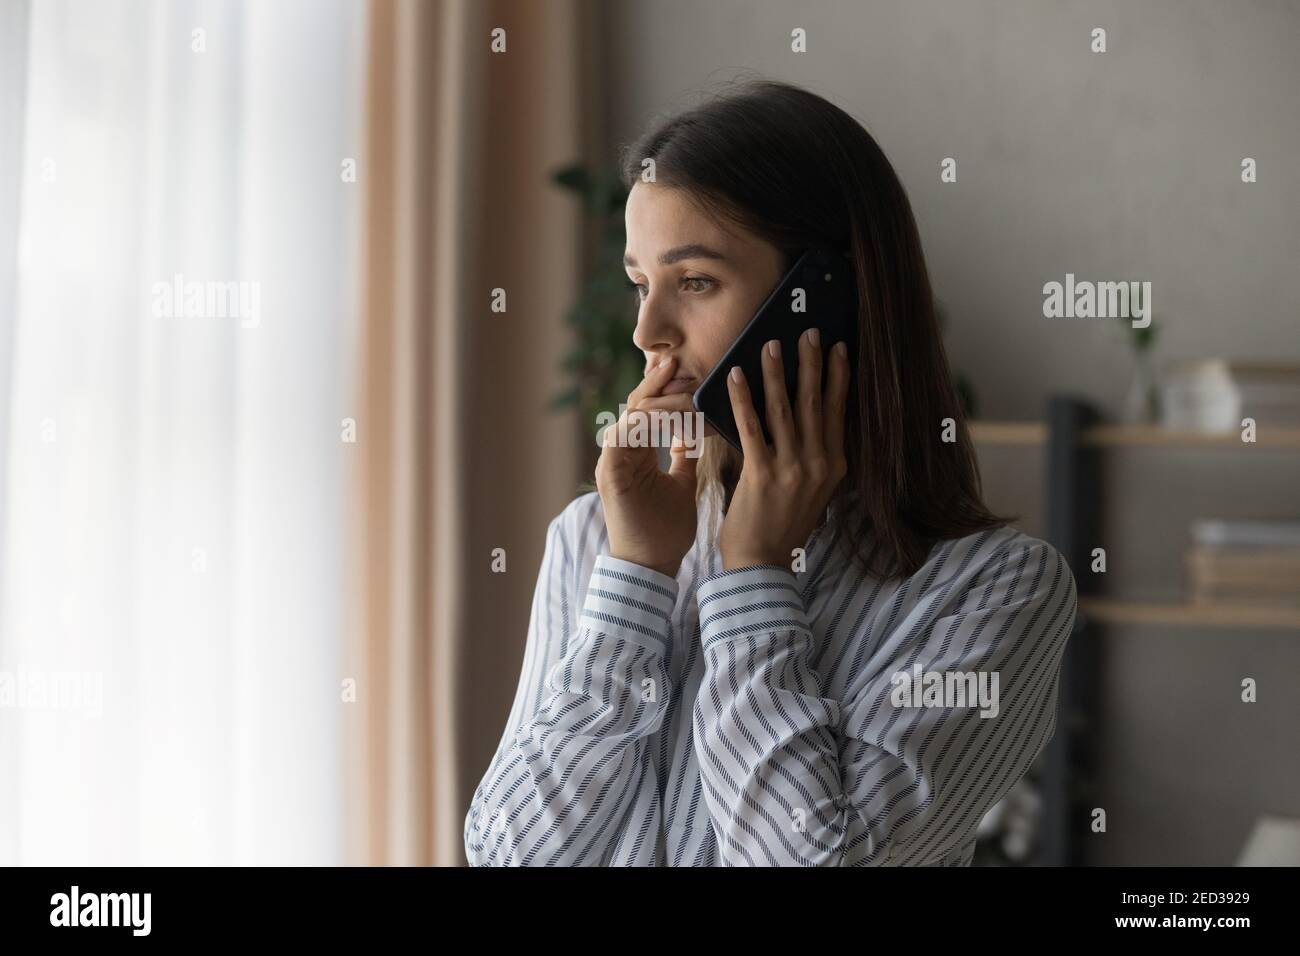 Sad compassionate young lady support friend in phone talk Stock Photo